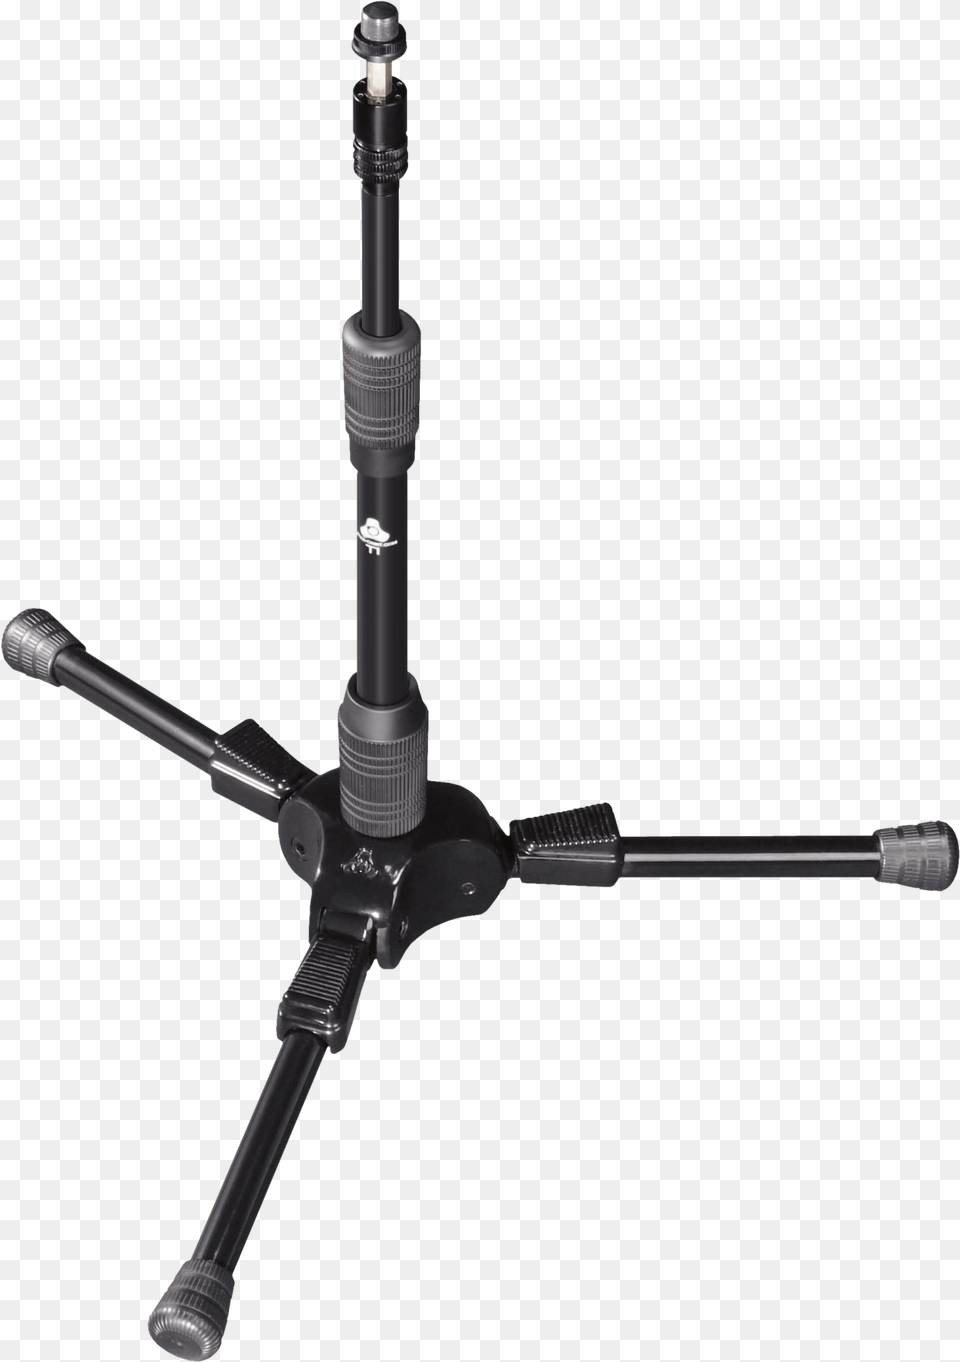 Triad Orbit Tripod Stand, Electrical Device, Microphone, Sword, Weapon Png